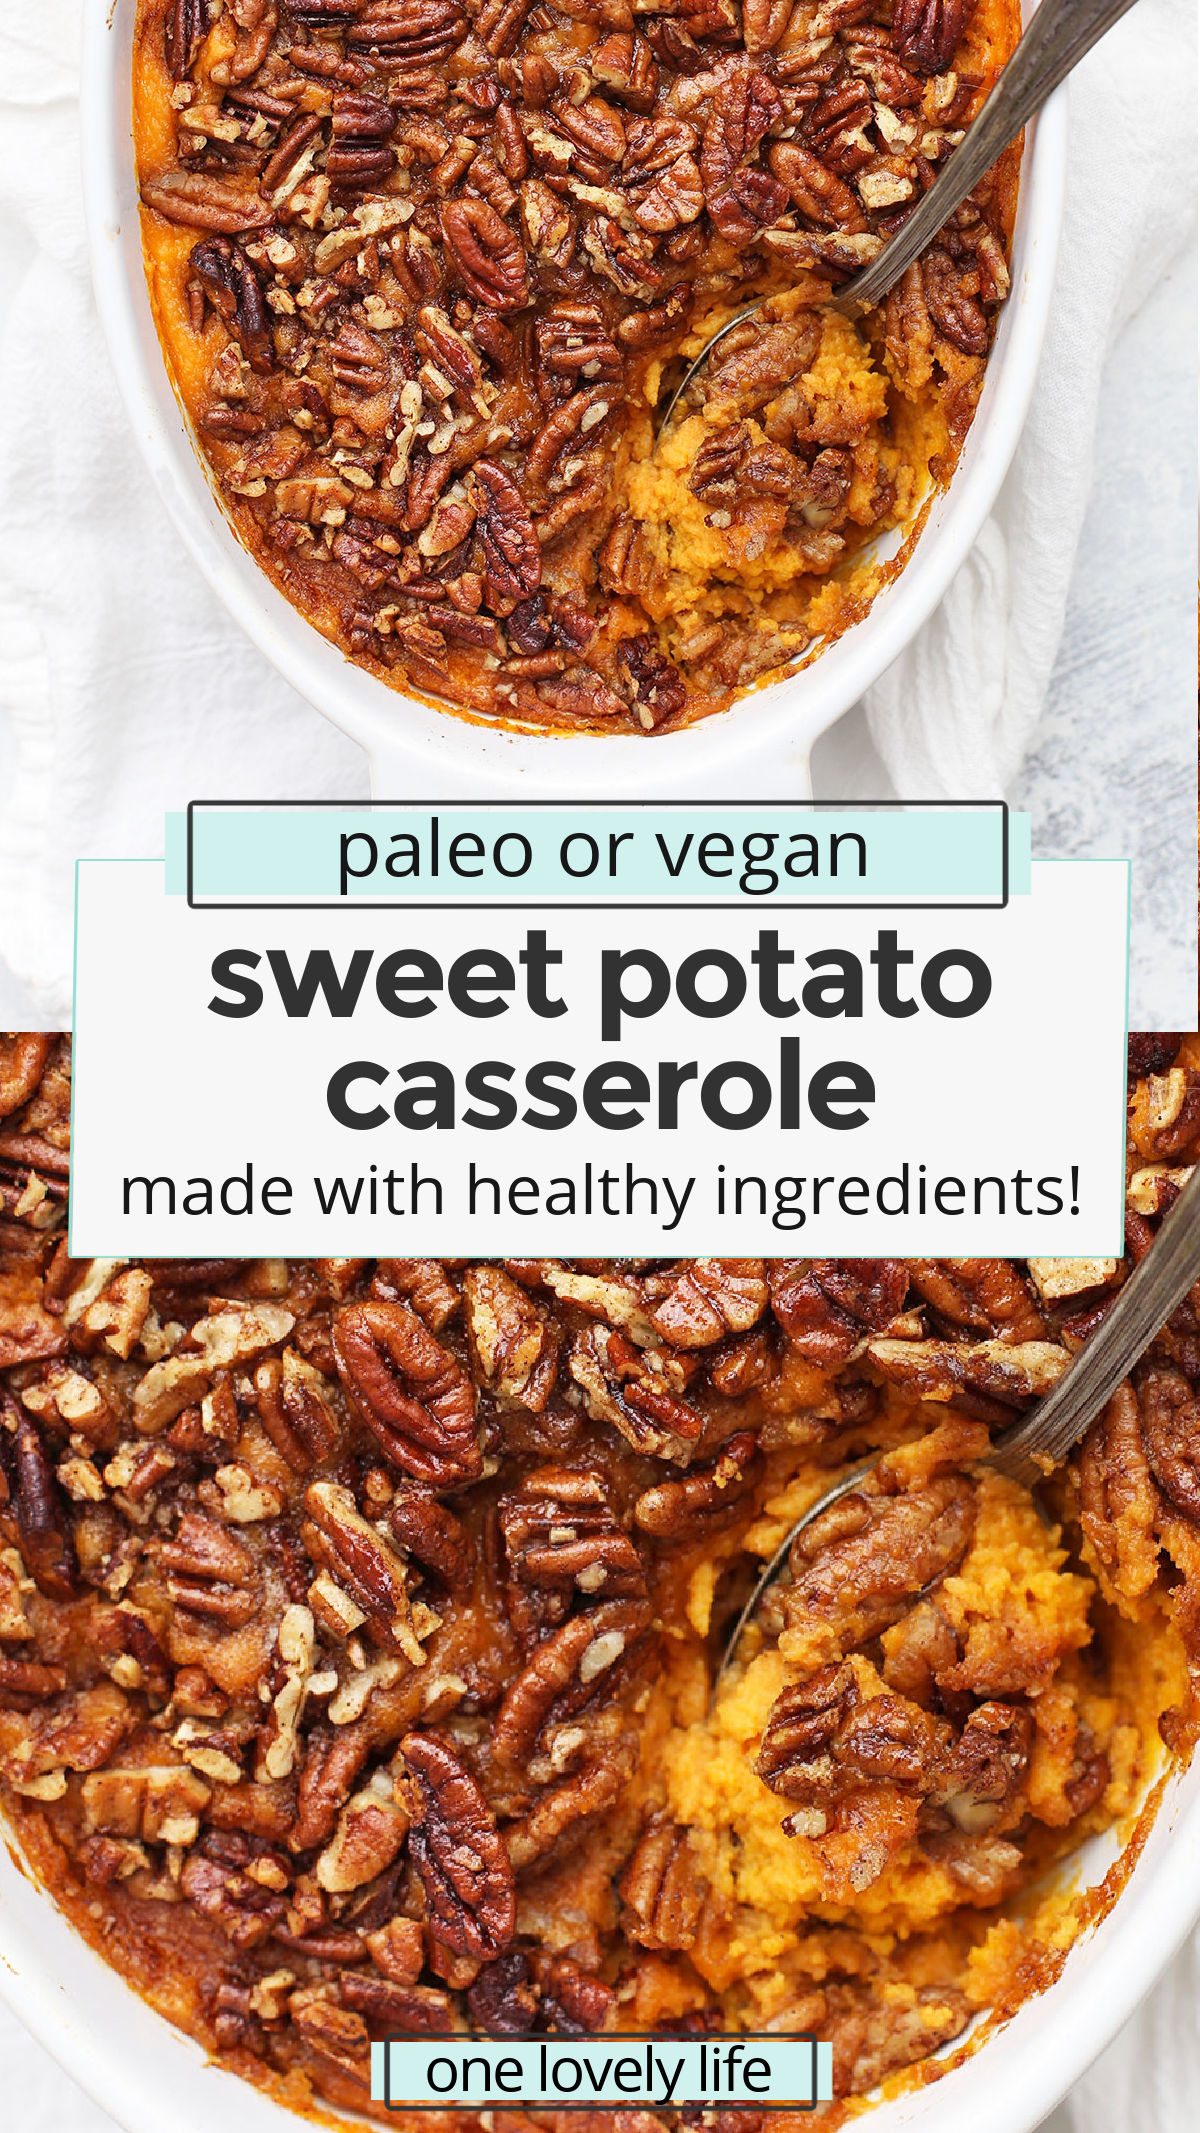 Paleo (or Vegan!) Sweet Potato Casserole - Gluten free, naturally sweetened, and totally delicious! // Vegan sweet potato casserole recipe // paleo sweet potato casserole recipe // healthy sweet potato casserole recipe // dairy free sweet potato casserole recipe // gluten free sweet potato casserole recipe // Thanksgiving side dish // Paleo thanksgiving // healthy thanksgiving recipe #sidedish #sweetpotatocasserole #paleo #vegan #glutenfree #healthy